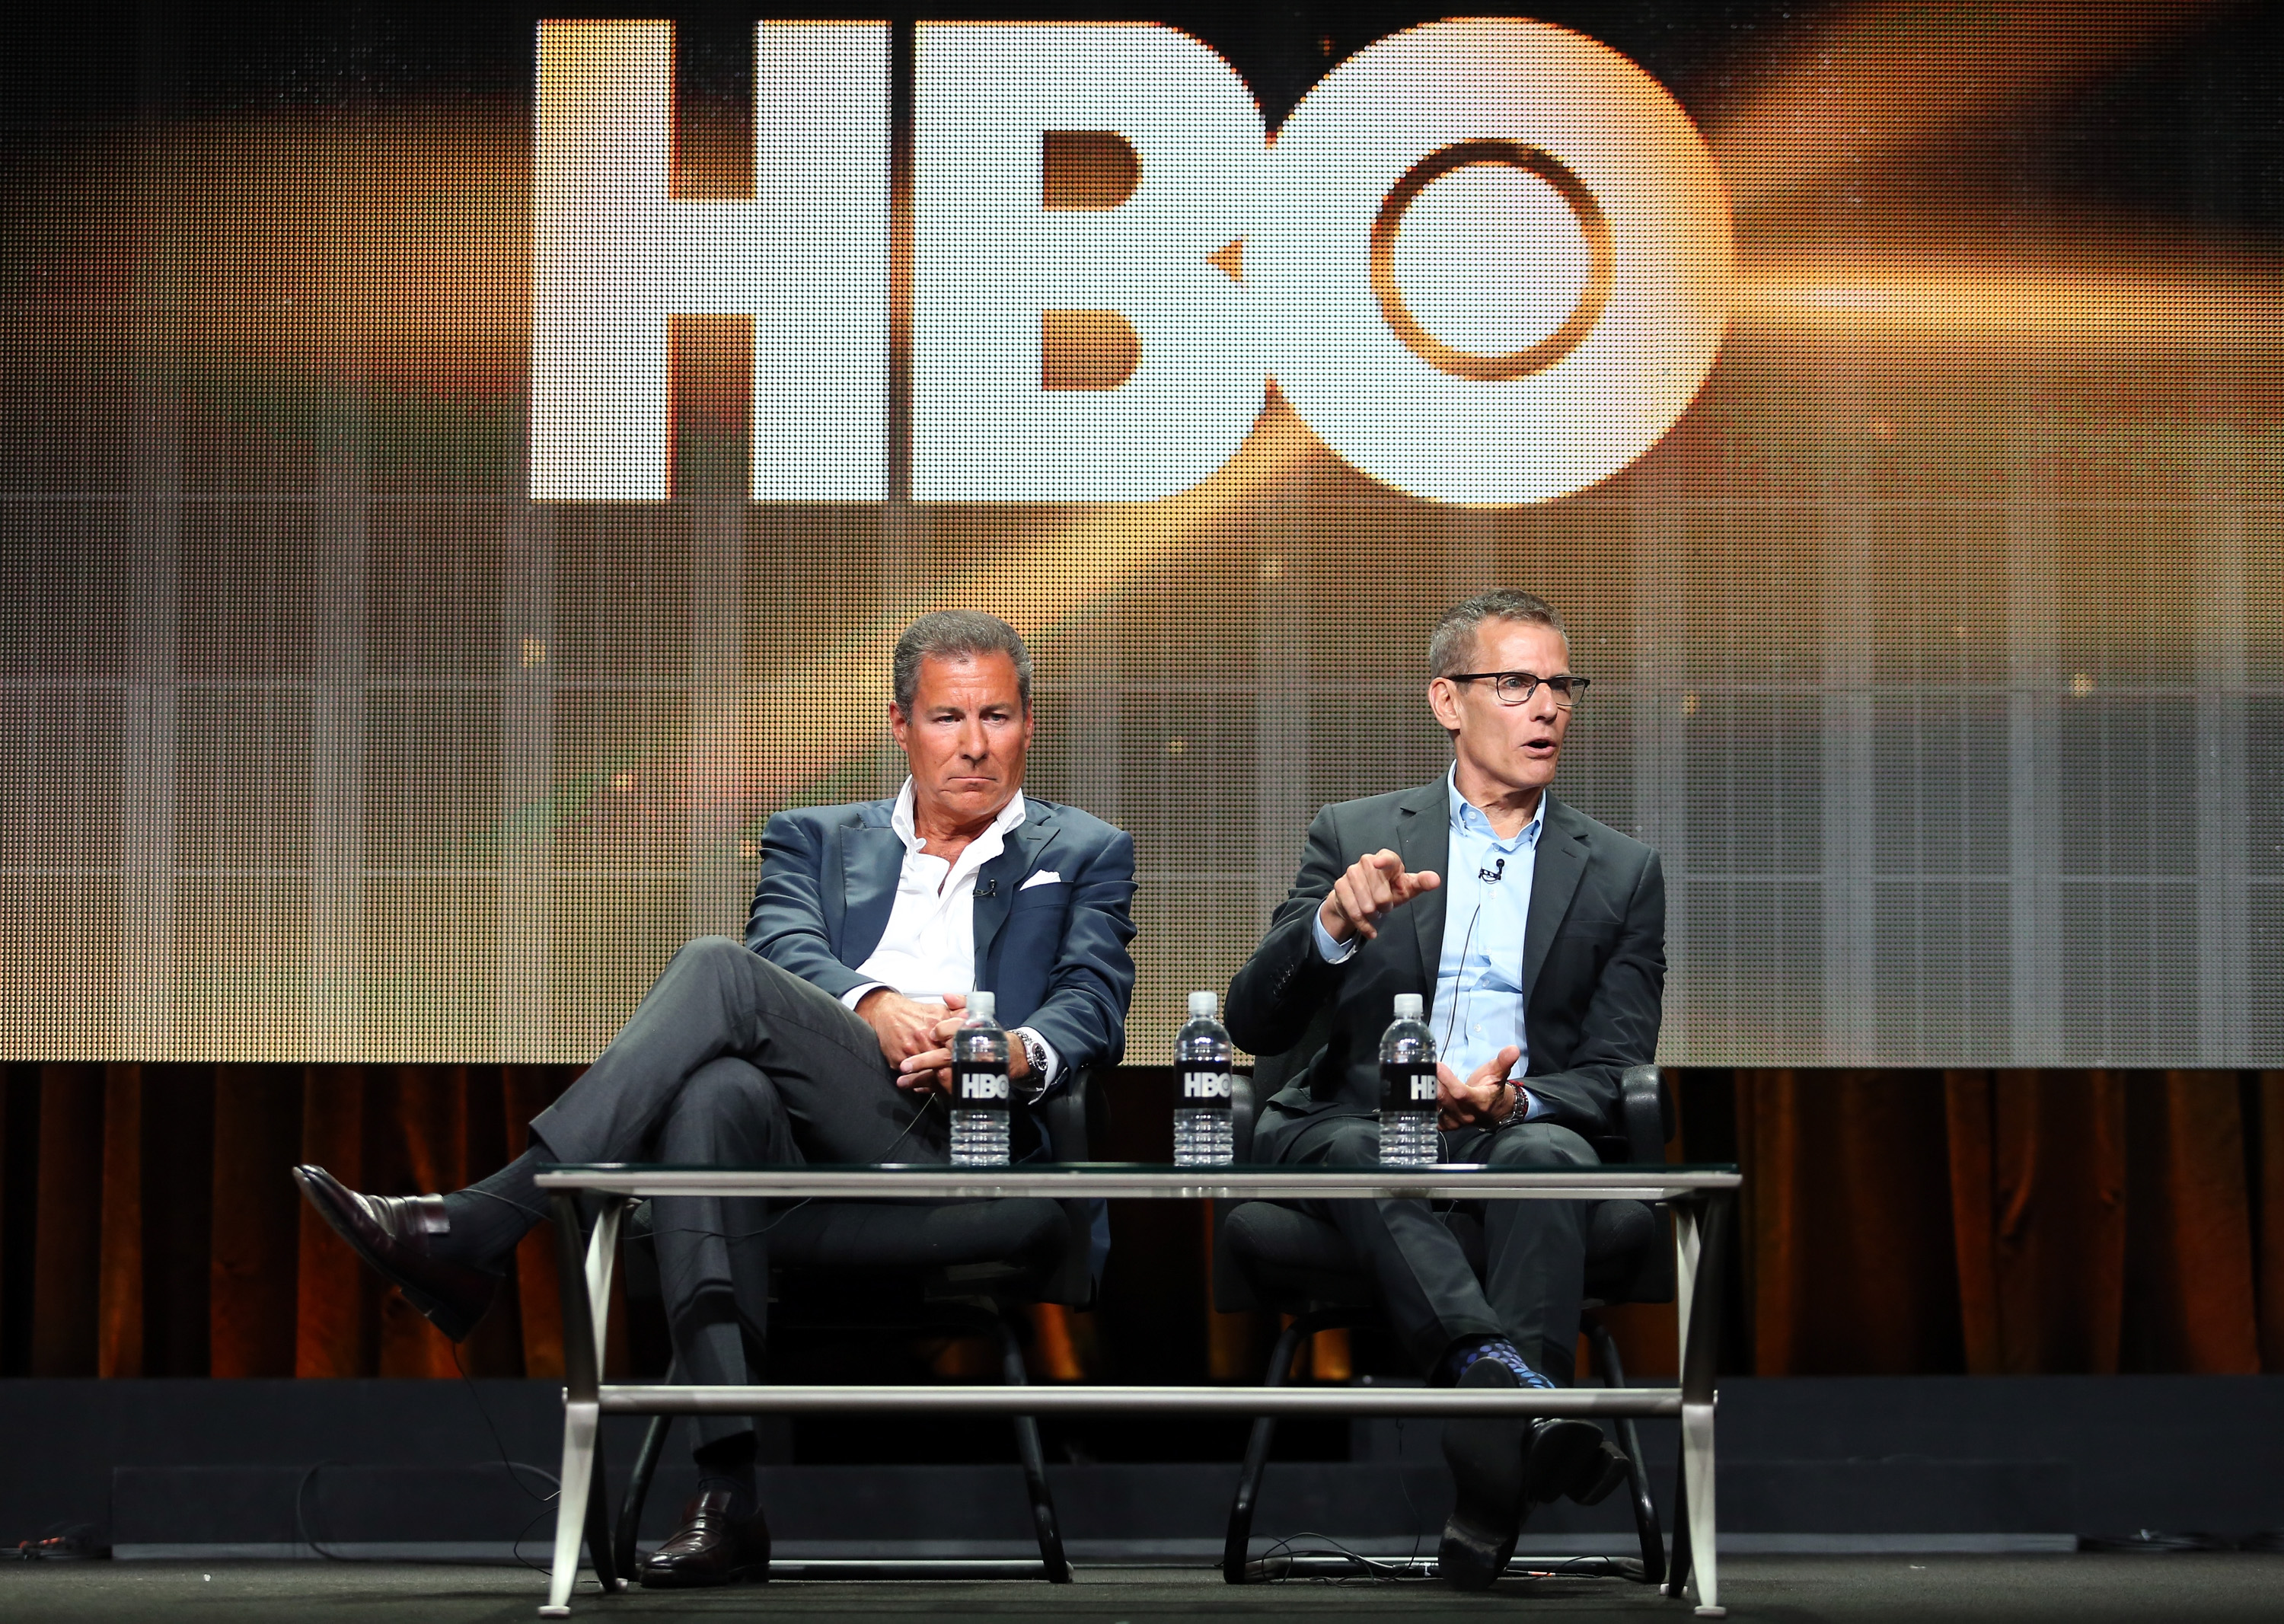 HBO Chairman and CEO Richard Plepler and HBO Programming President Michael Lombardo speak onstage at the Executive Session panel during the HBO portion of the 2014 Summer Television Critics Association on July 10, 2014 in Beverly Hills. (Frederick M. Brown—Getty Images)